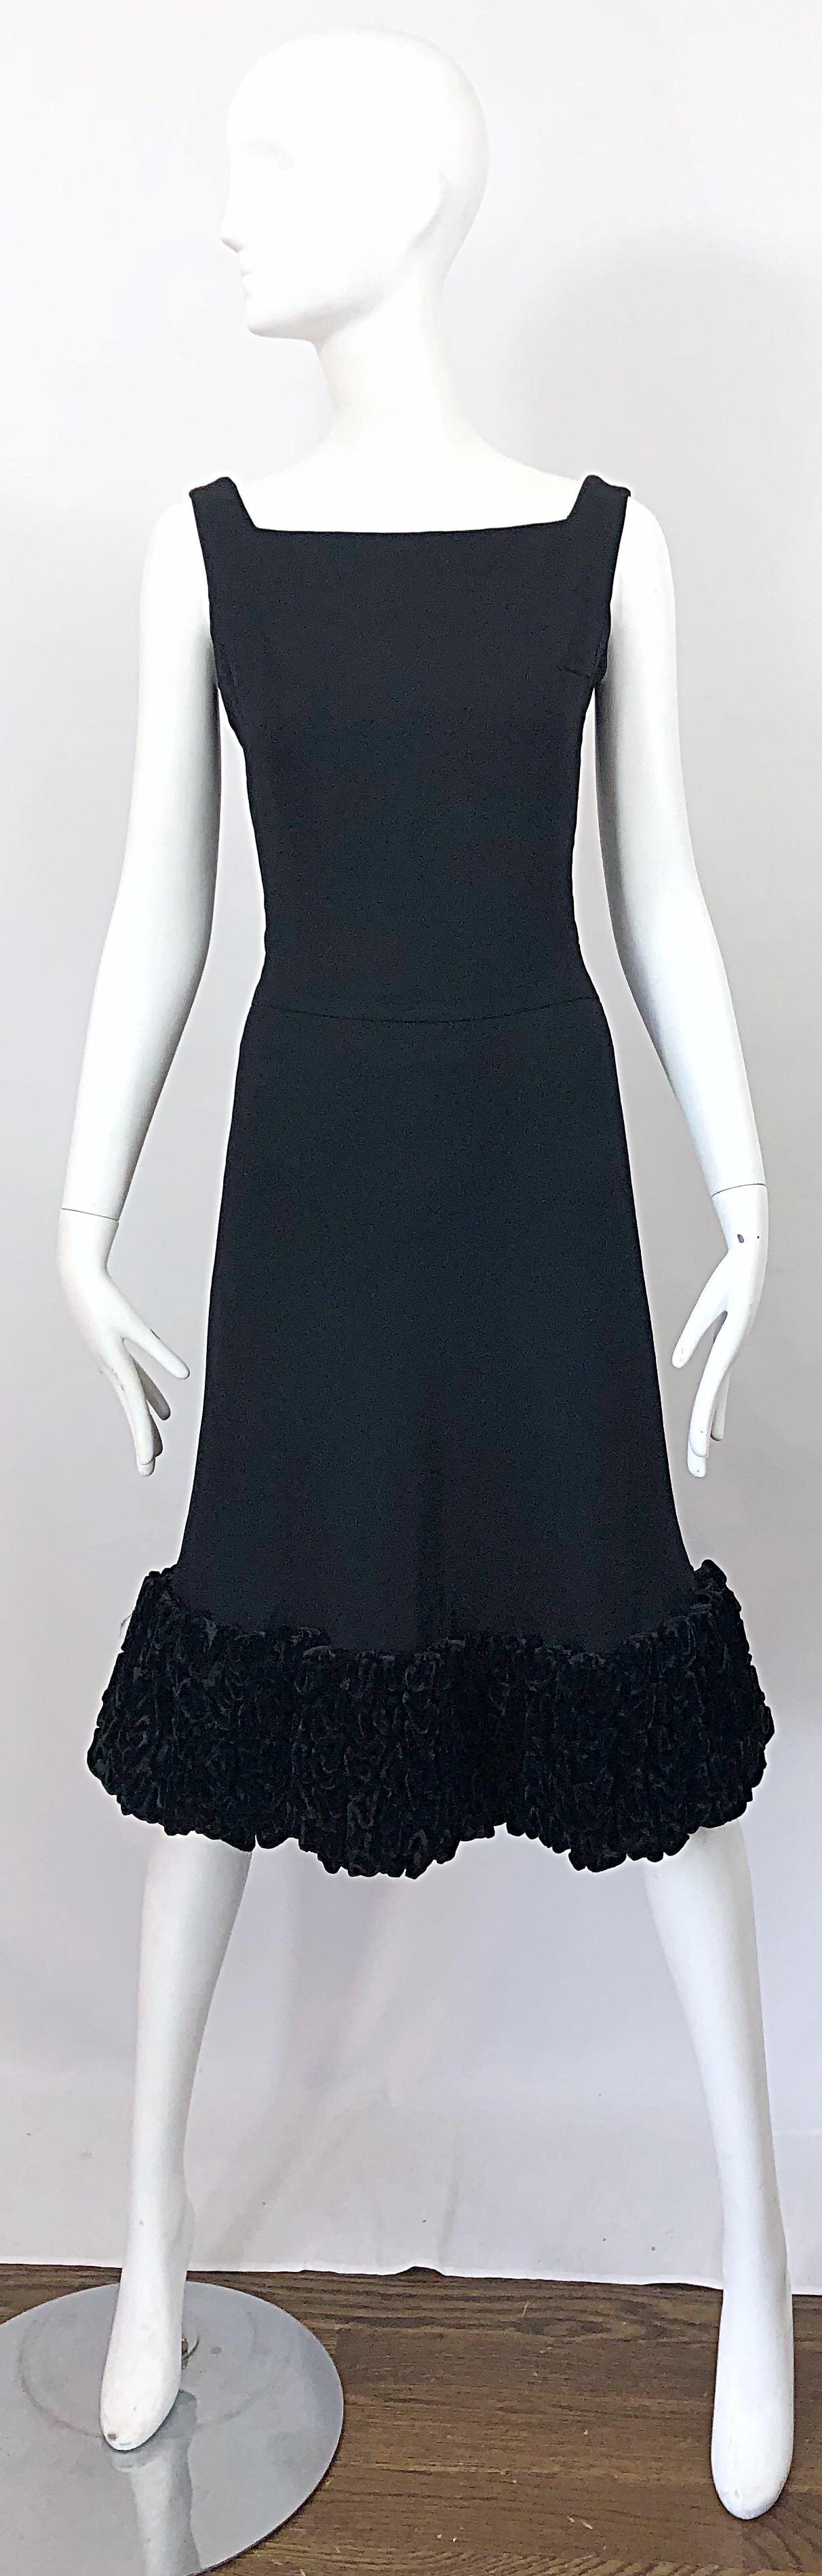 Chic 1960s EVON BESACK black crepe and velvet A-Line dress! Features a flattering square neck with a tailored bodice. Forgiving full skirt with intricate velvet details at hem. Full metal zipper up the back with 
hook-and-eye closure. Expertly